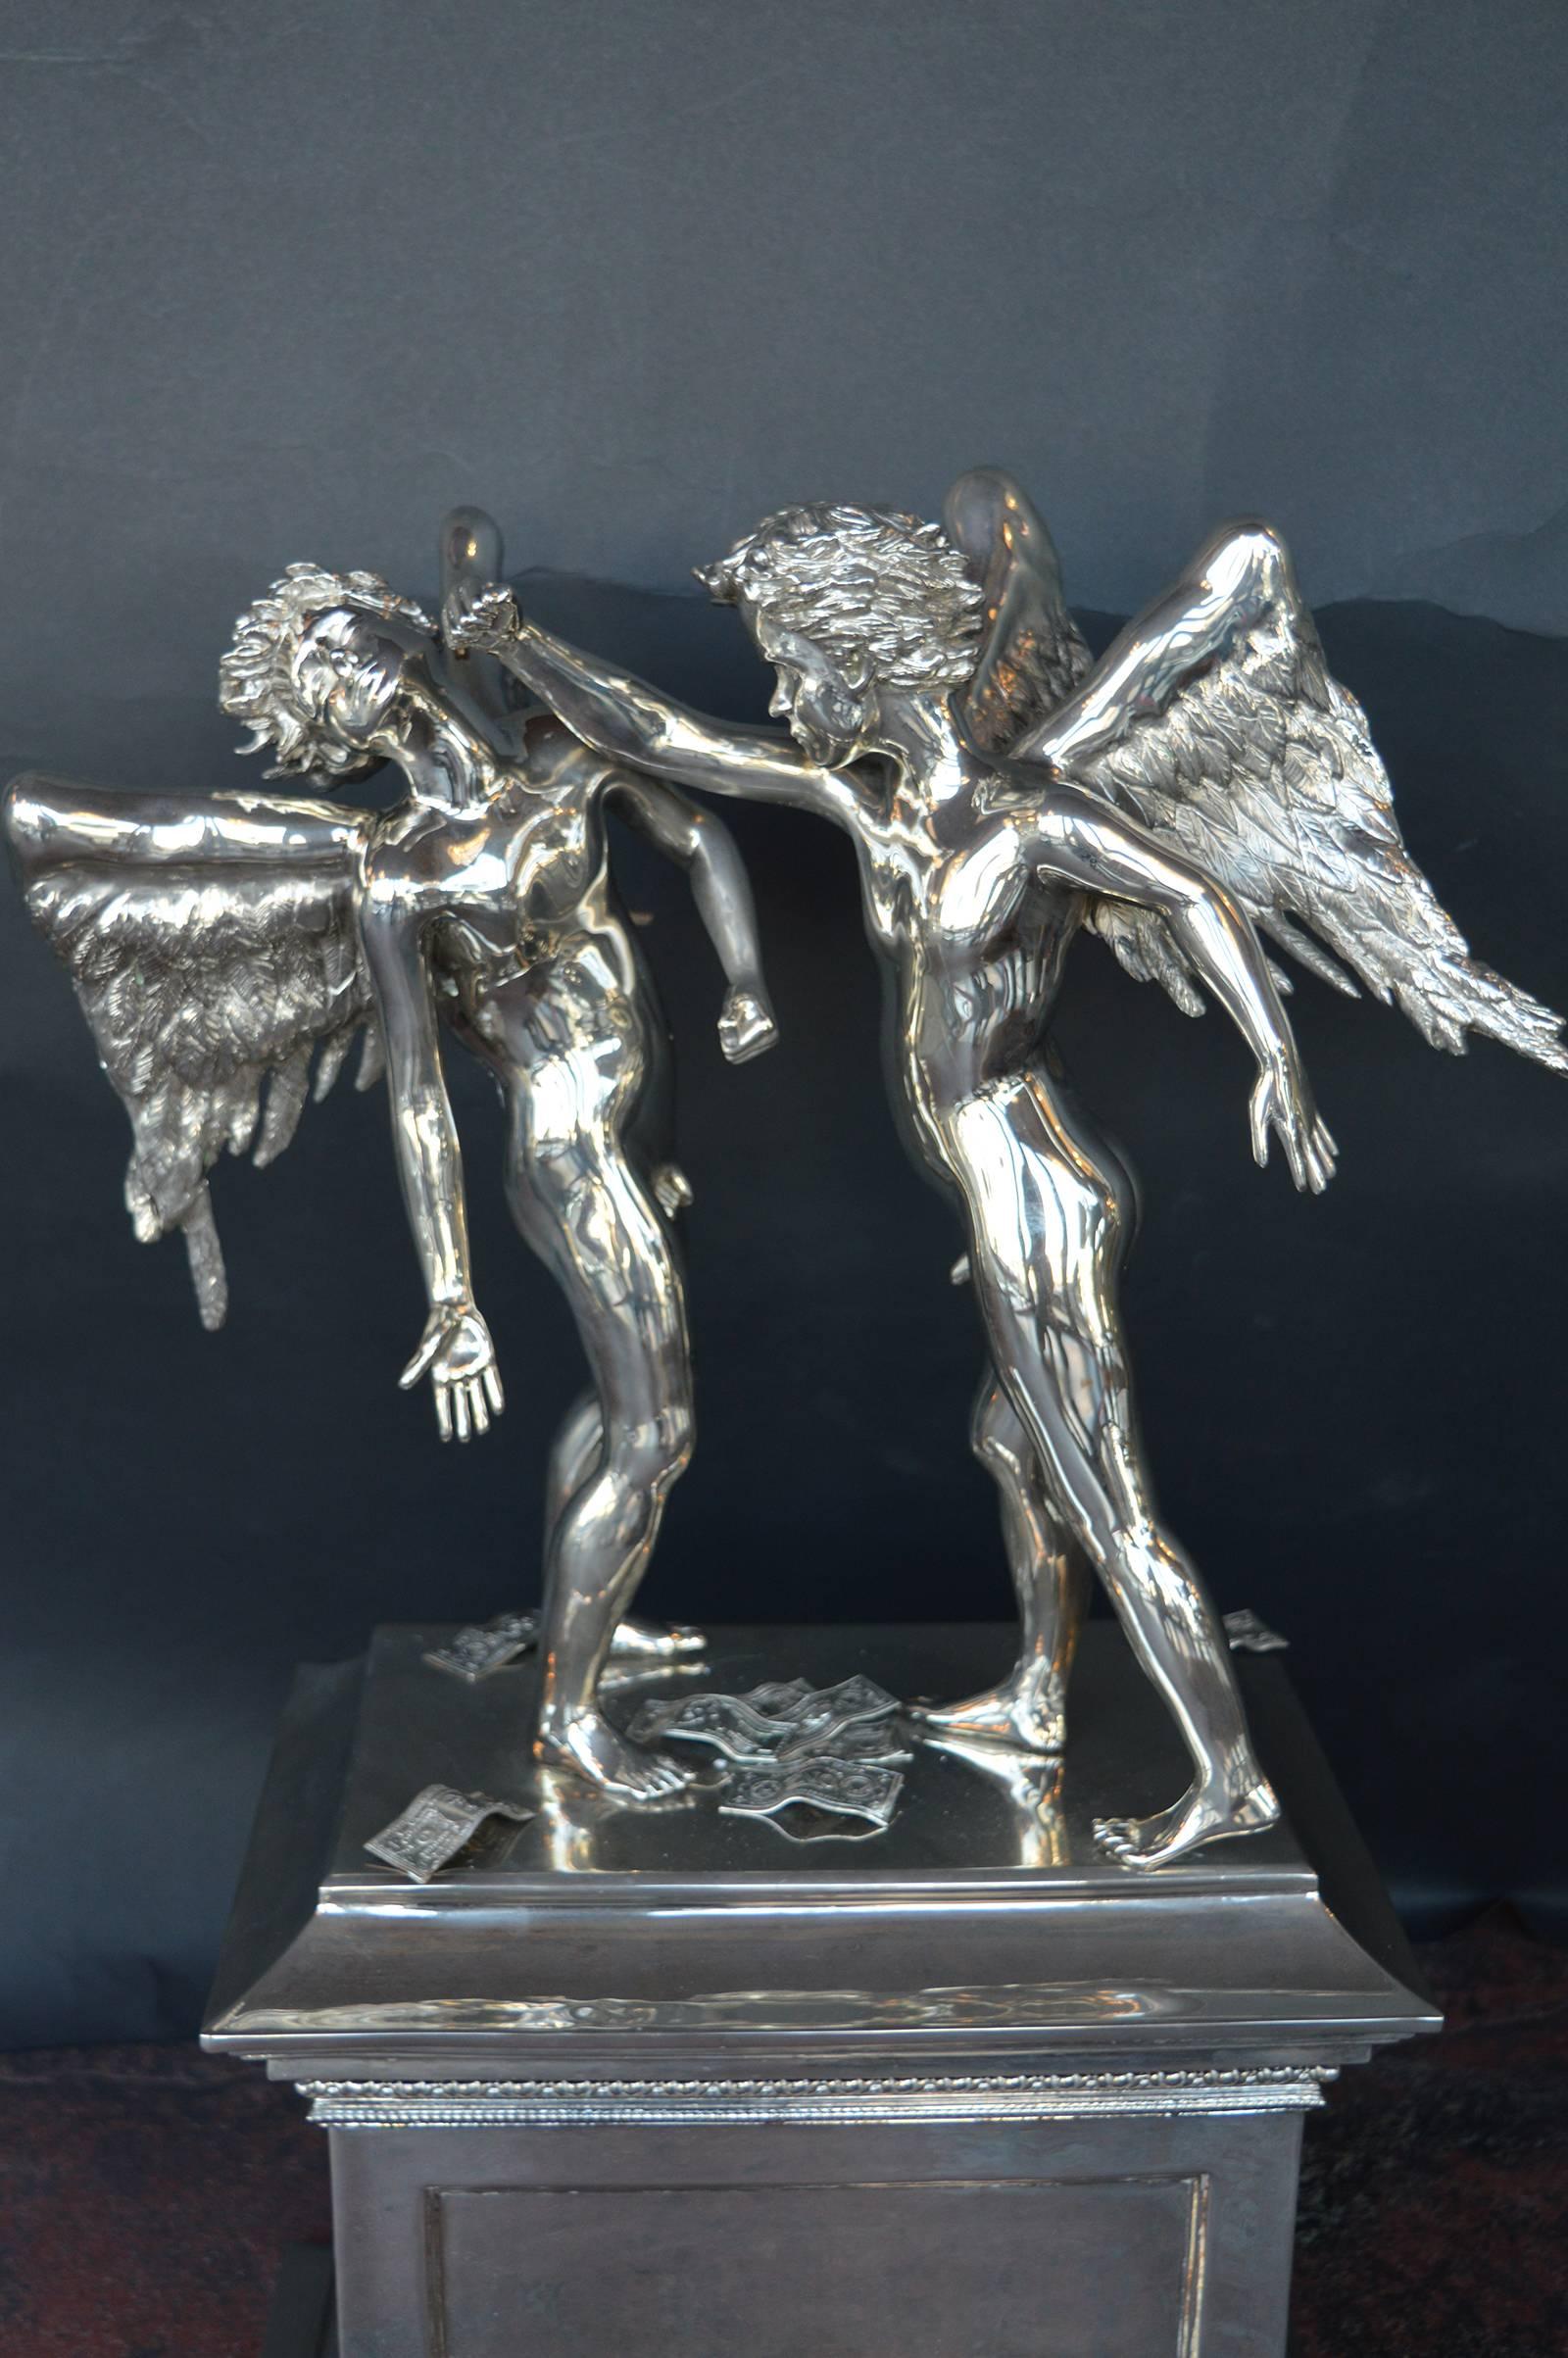 The idol kids of today, beginning of the end by Antony Micallef. Signed bottom and stamped edition number and date, inside the sculpture. Bronze nickel-plated.